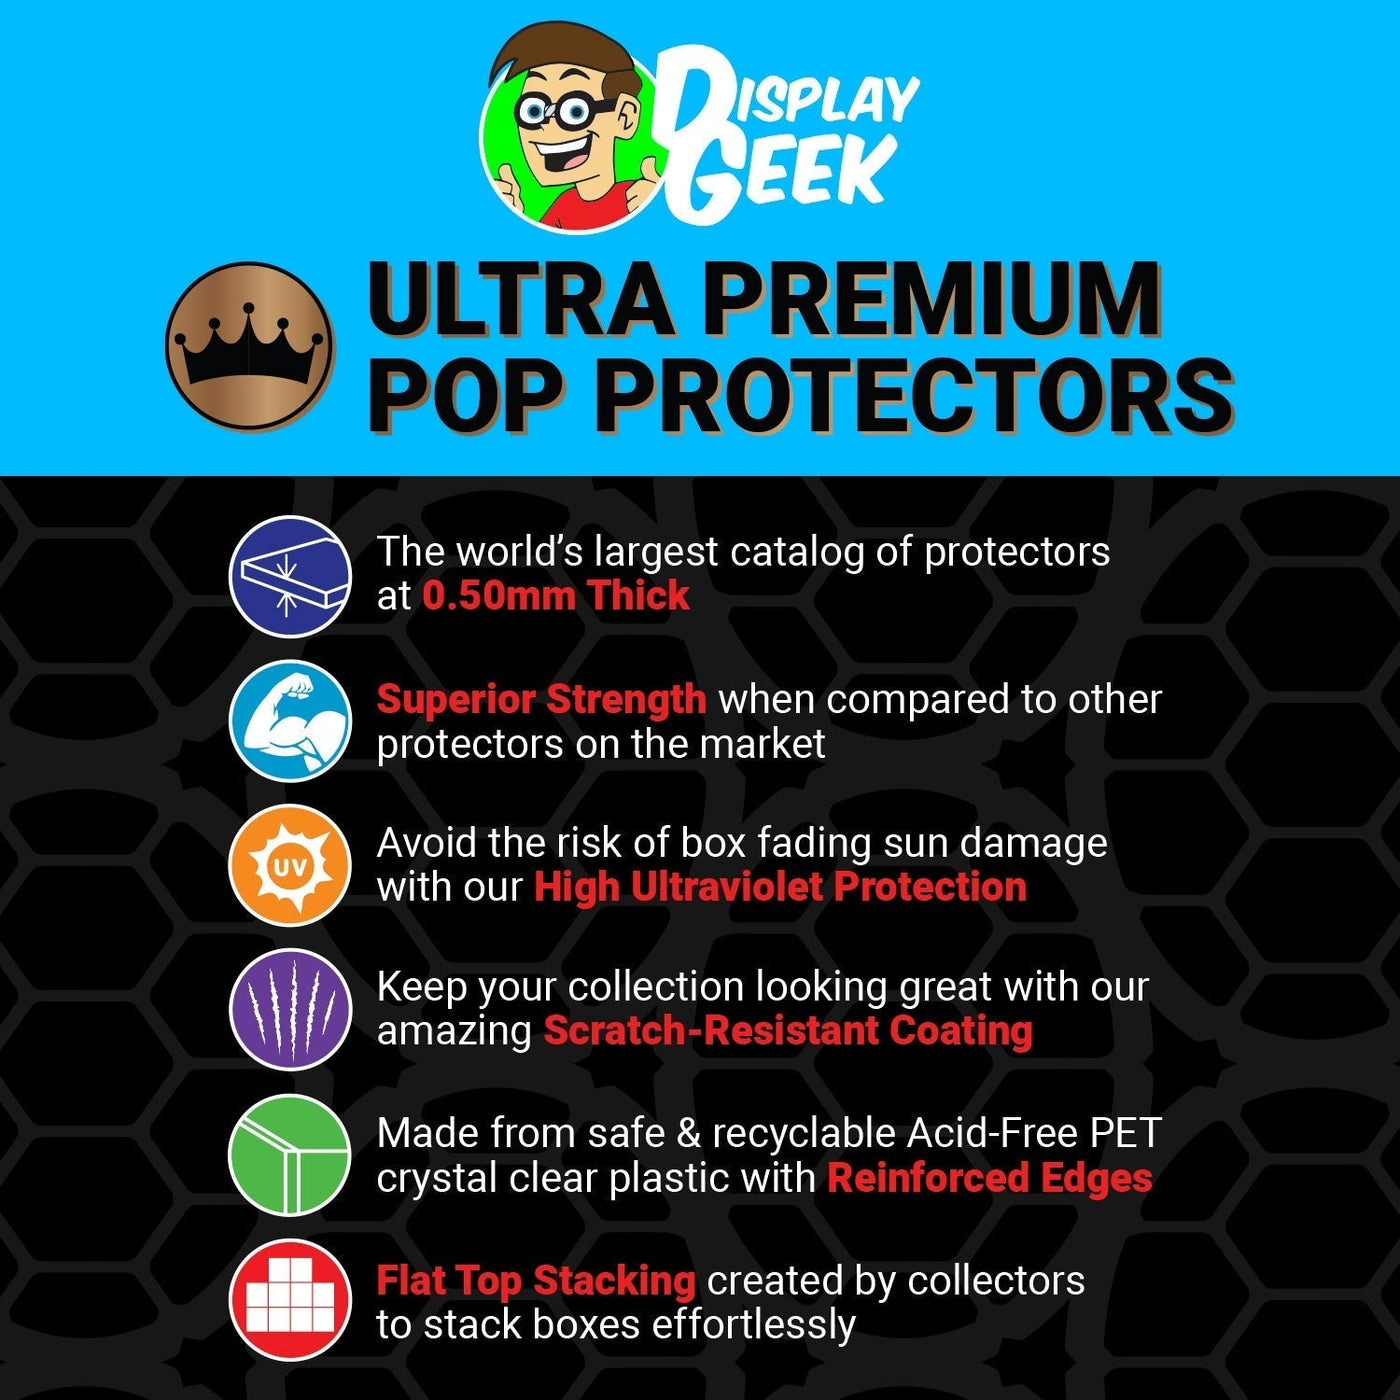 Pop Protector for 2 Pack The Rock and Mankind Funko Pop on The Protector Guide App by Display Geek